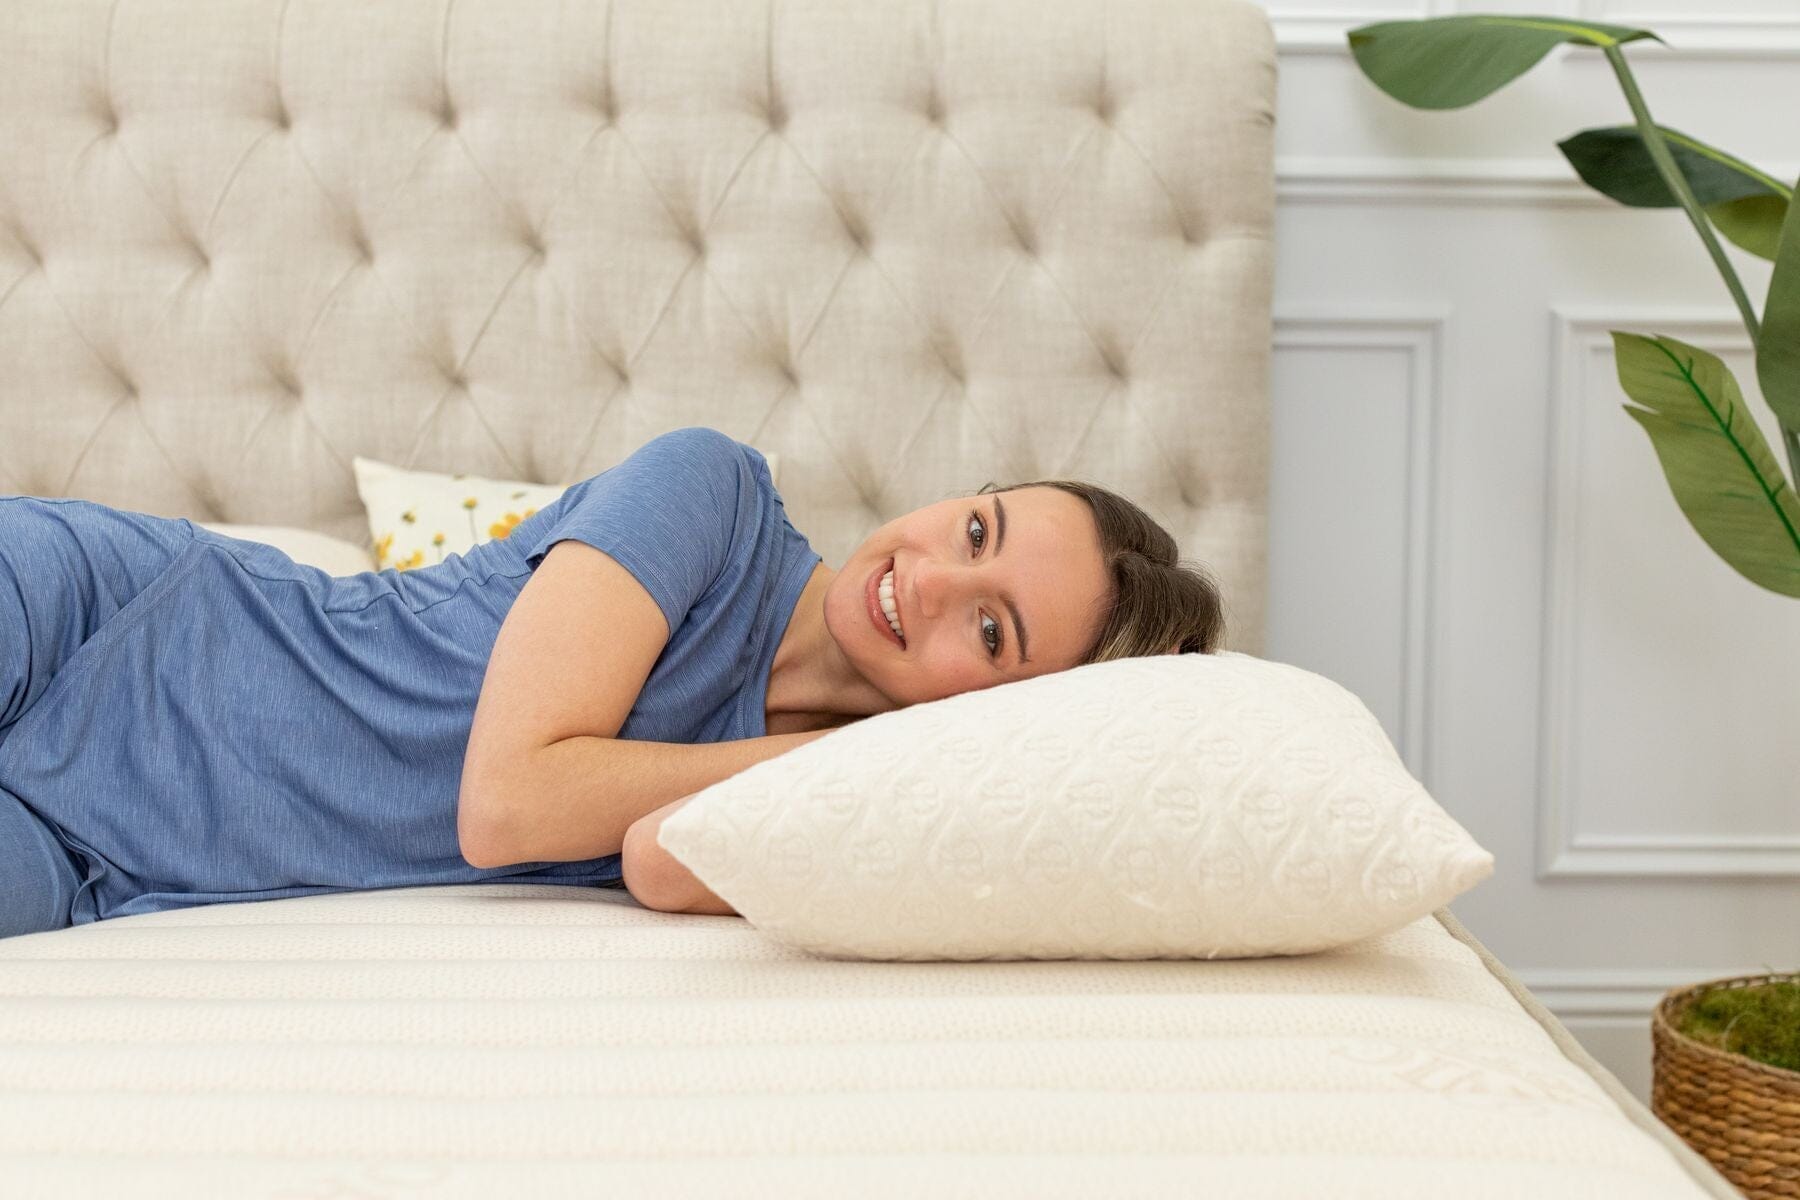 Xtreme Comforts Pillows for Sleeping - GreenGuard Gold Certified Adjustable